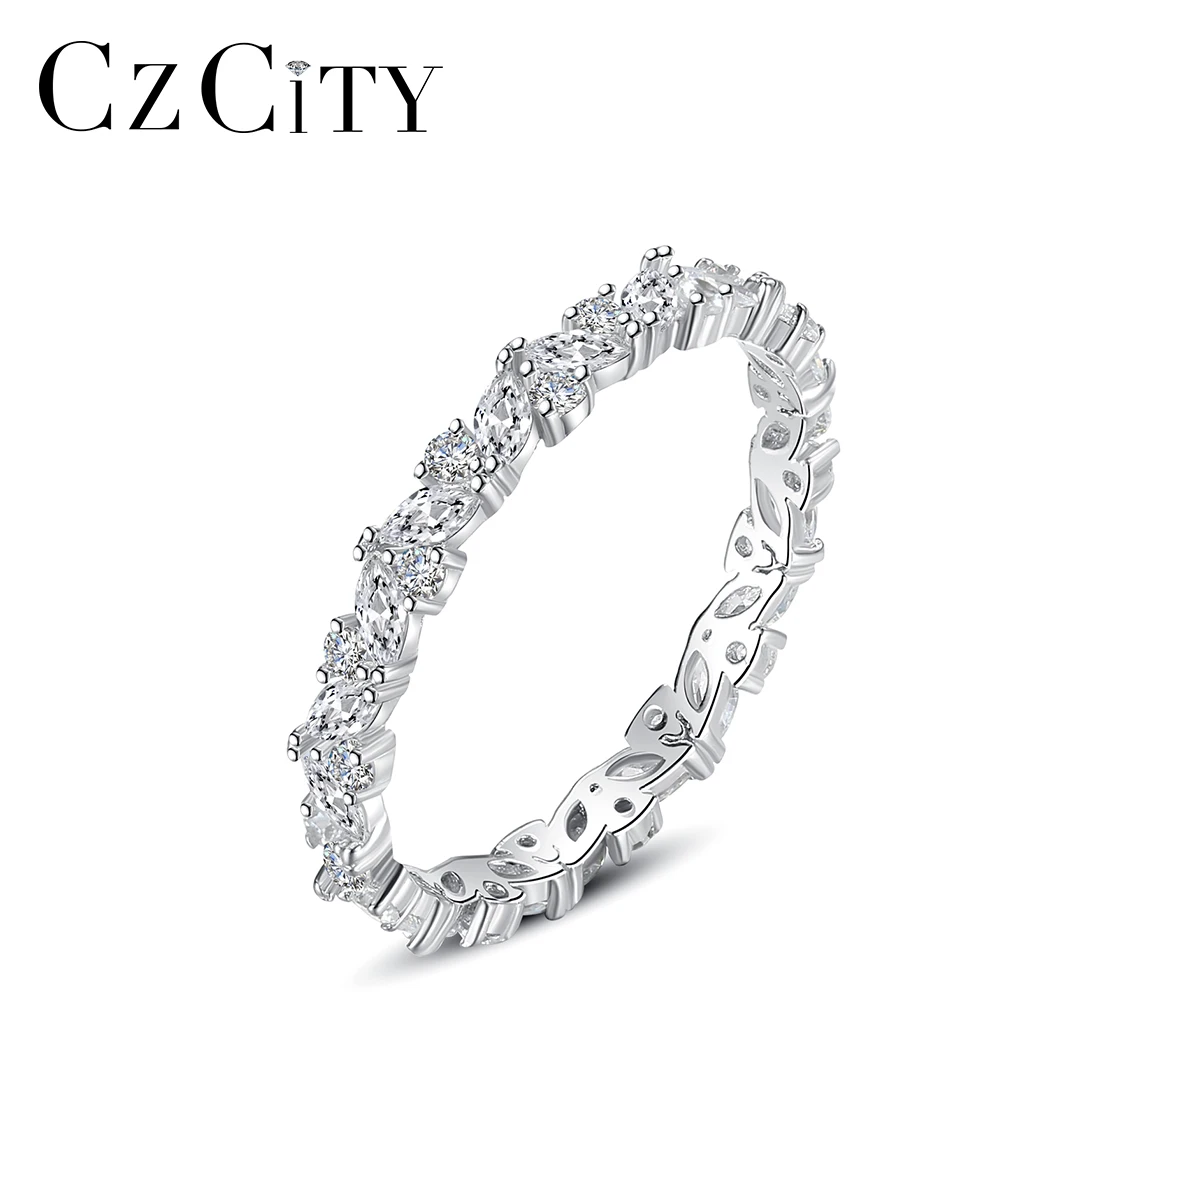 

CZCITY New Band Trending Jewelry Woman Circle Cz White Zircone Stone Mini Cubic Zircon Thin 925 Sterling Silver Ring